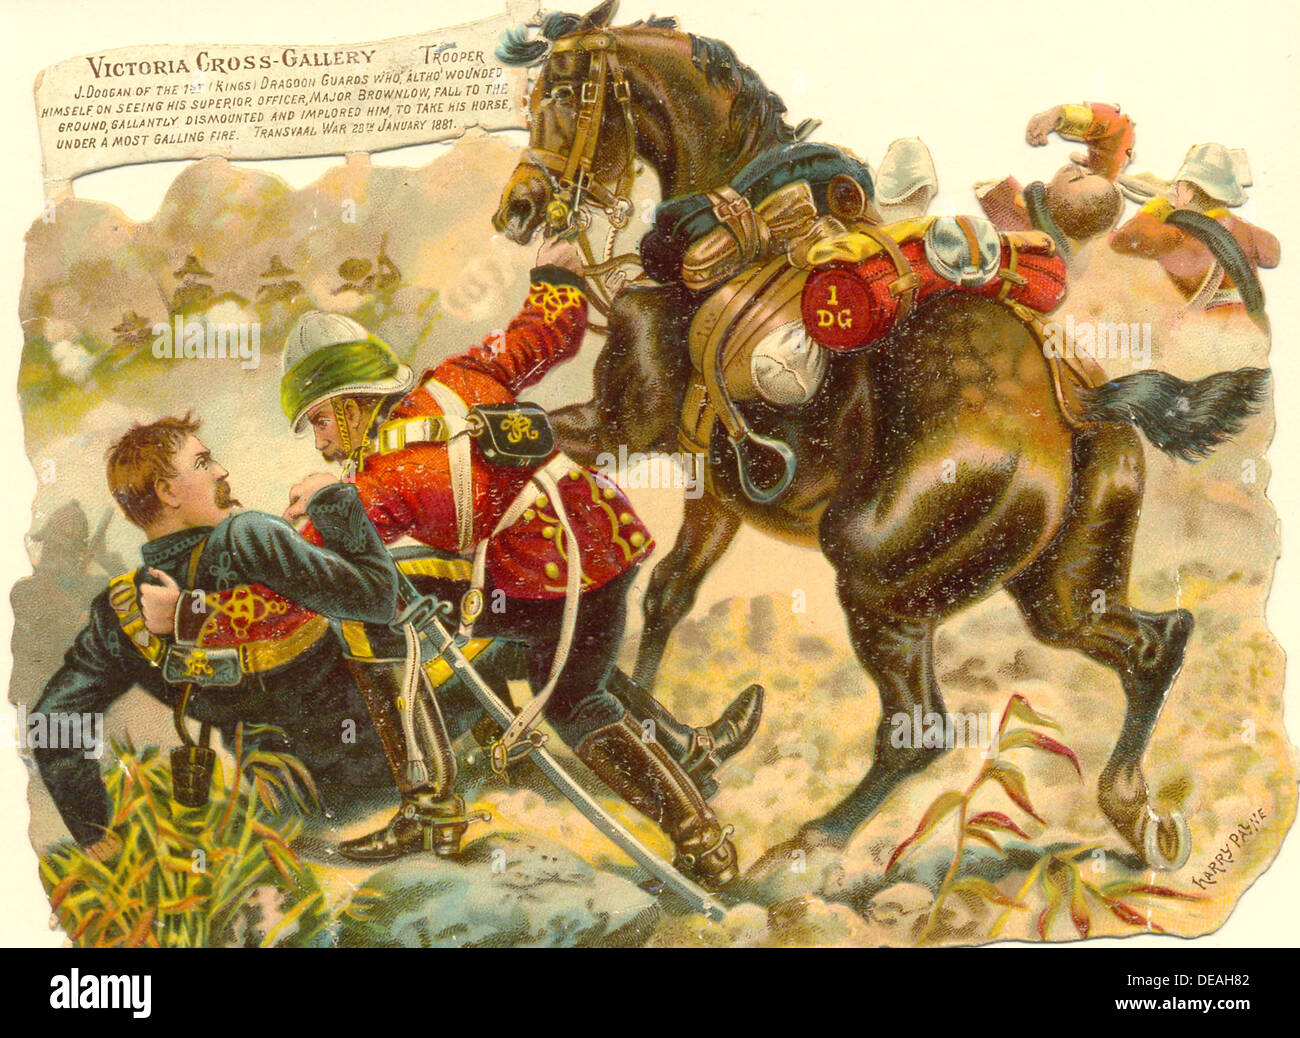 Chromolithographed Die-cut rottame dal Victoria Cross Galleria dell'artista Harry Payne Foto Stock